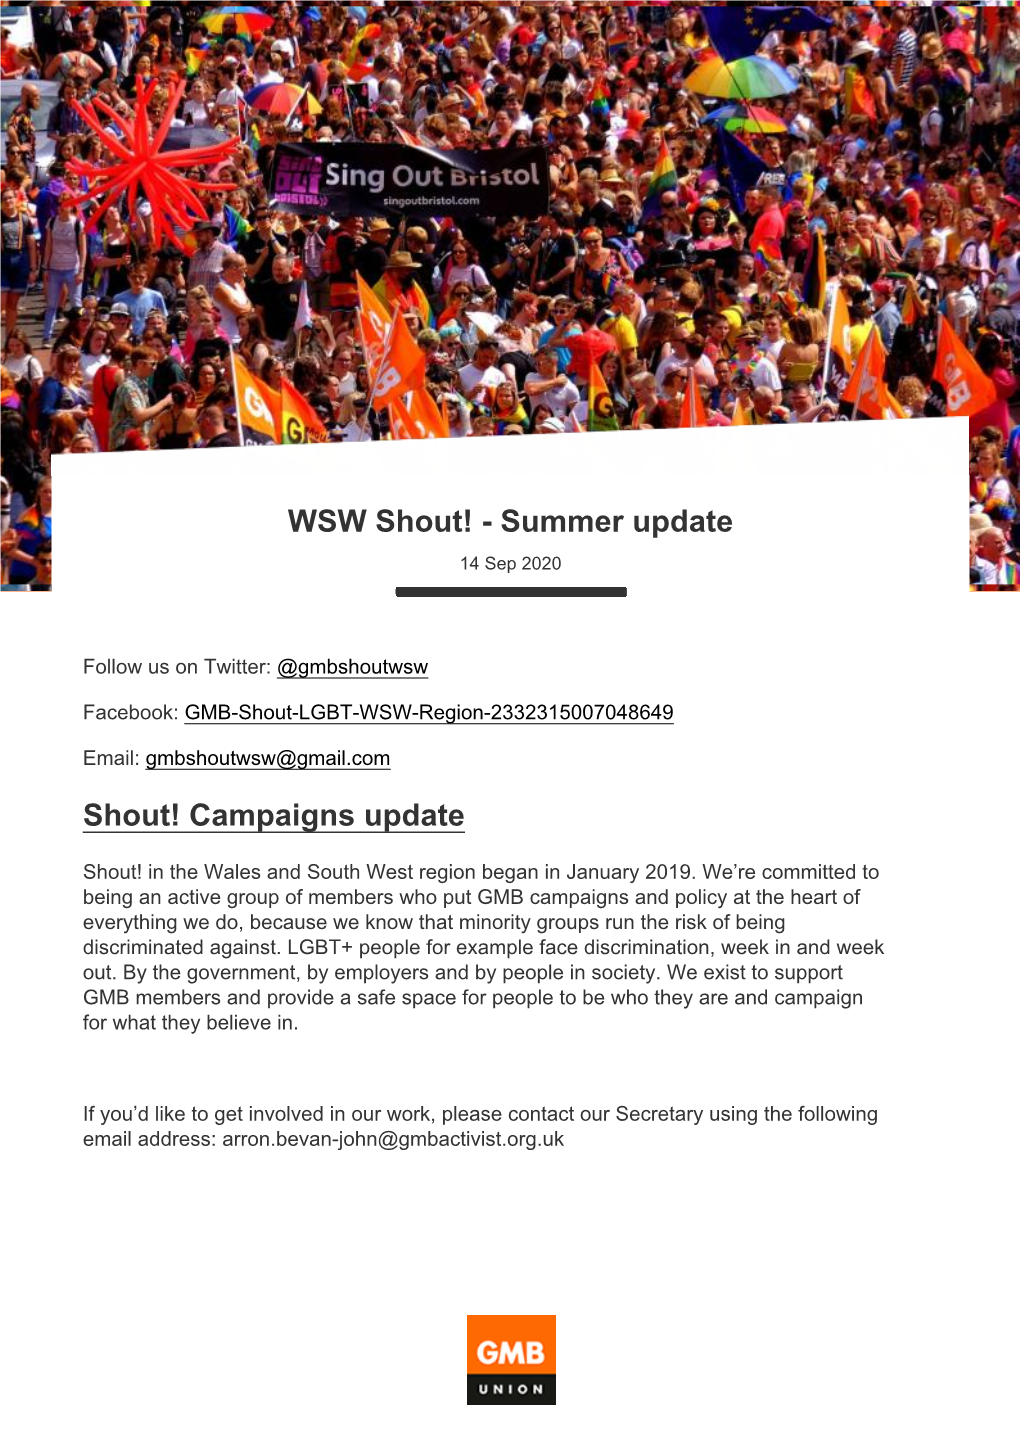 WSW Shout! - Summer Update 14 Sep 2020